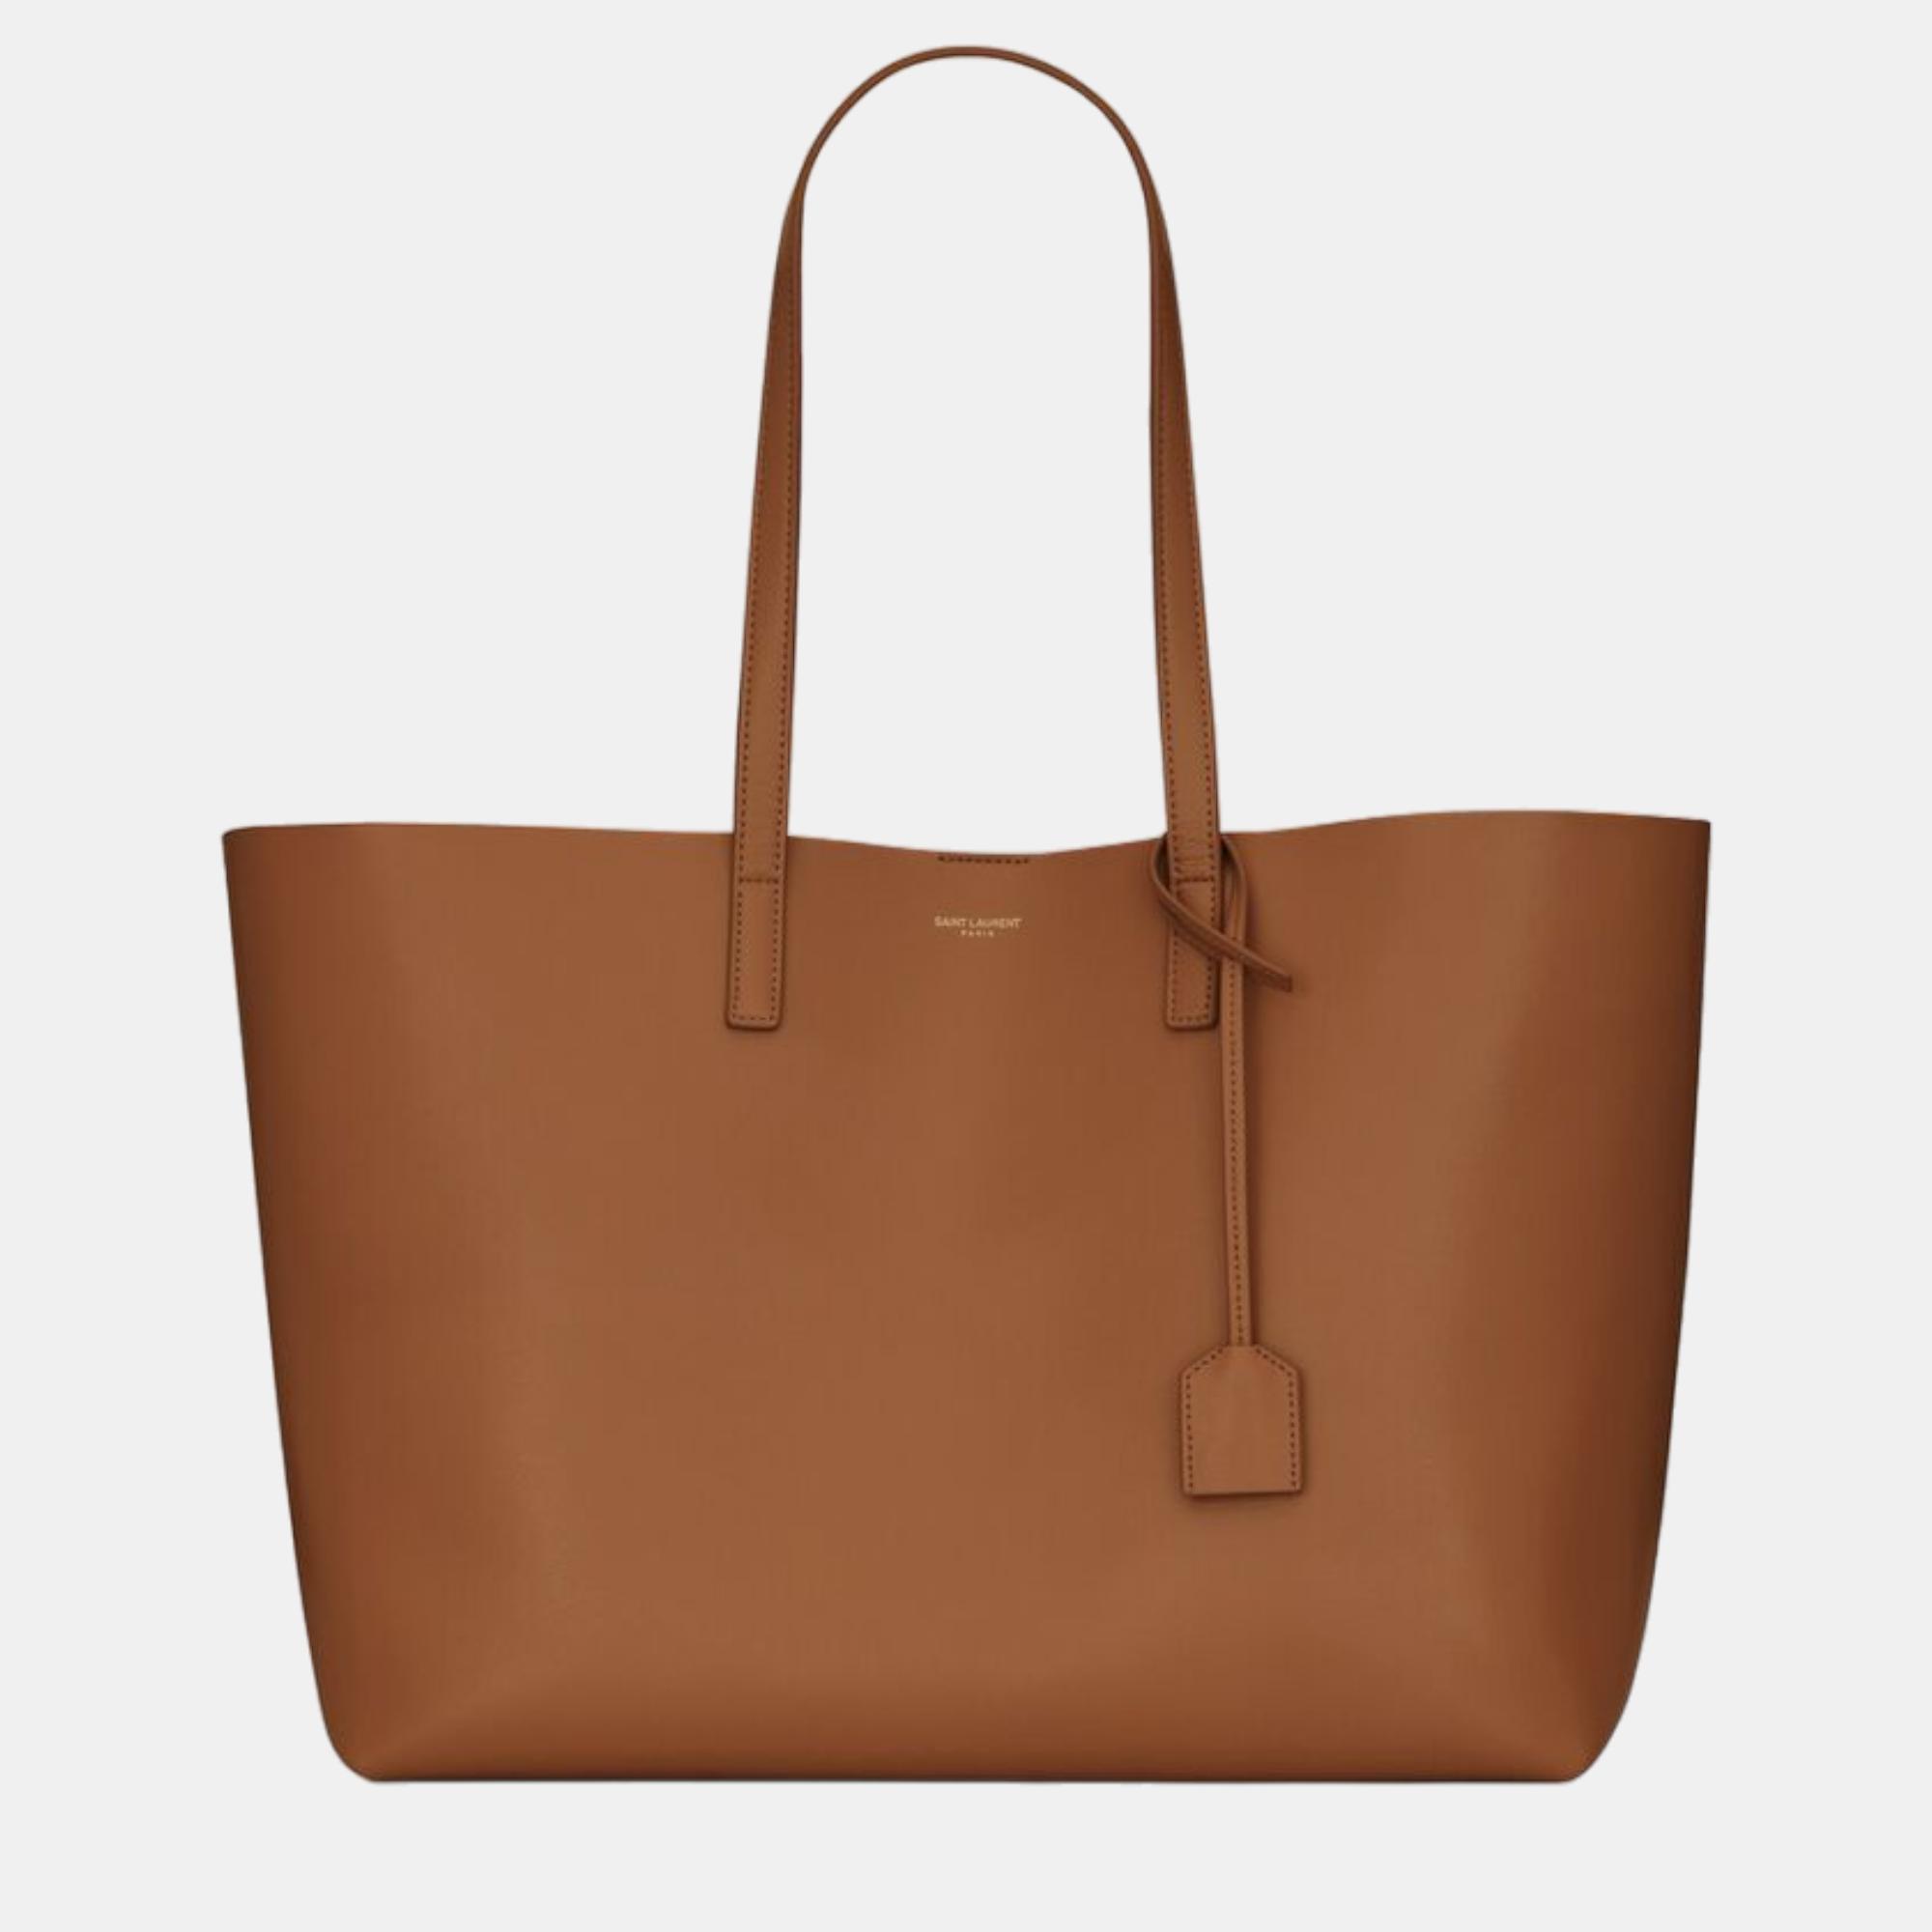 

SHOPPING BAG SAINT LAURENT E/W IN SUPPLE LEATHER, Brown